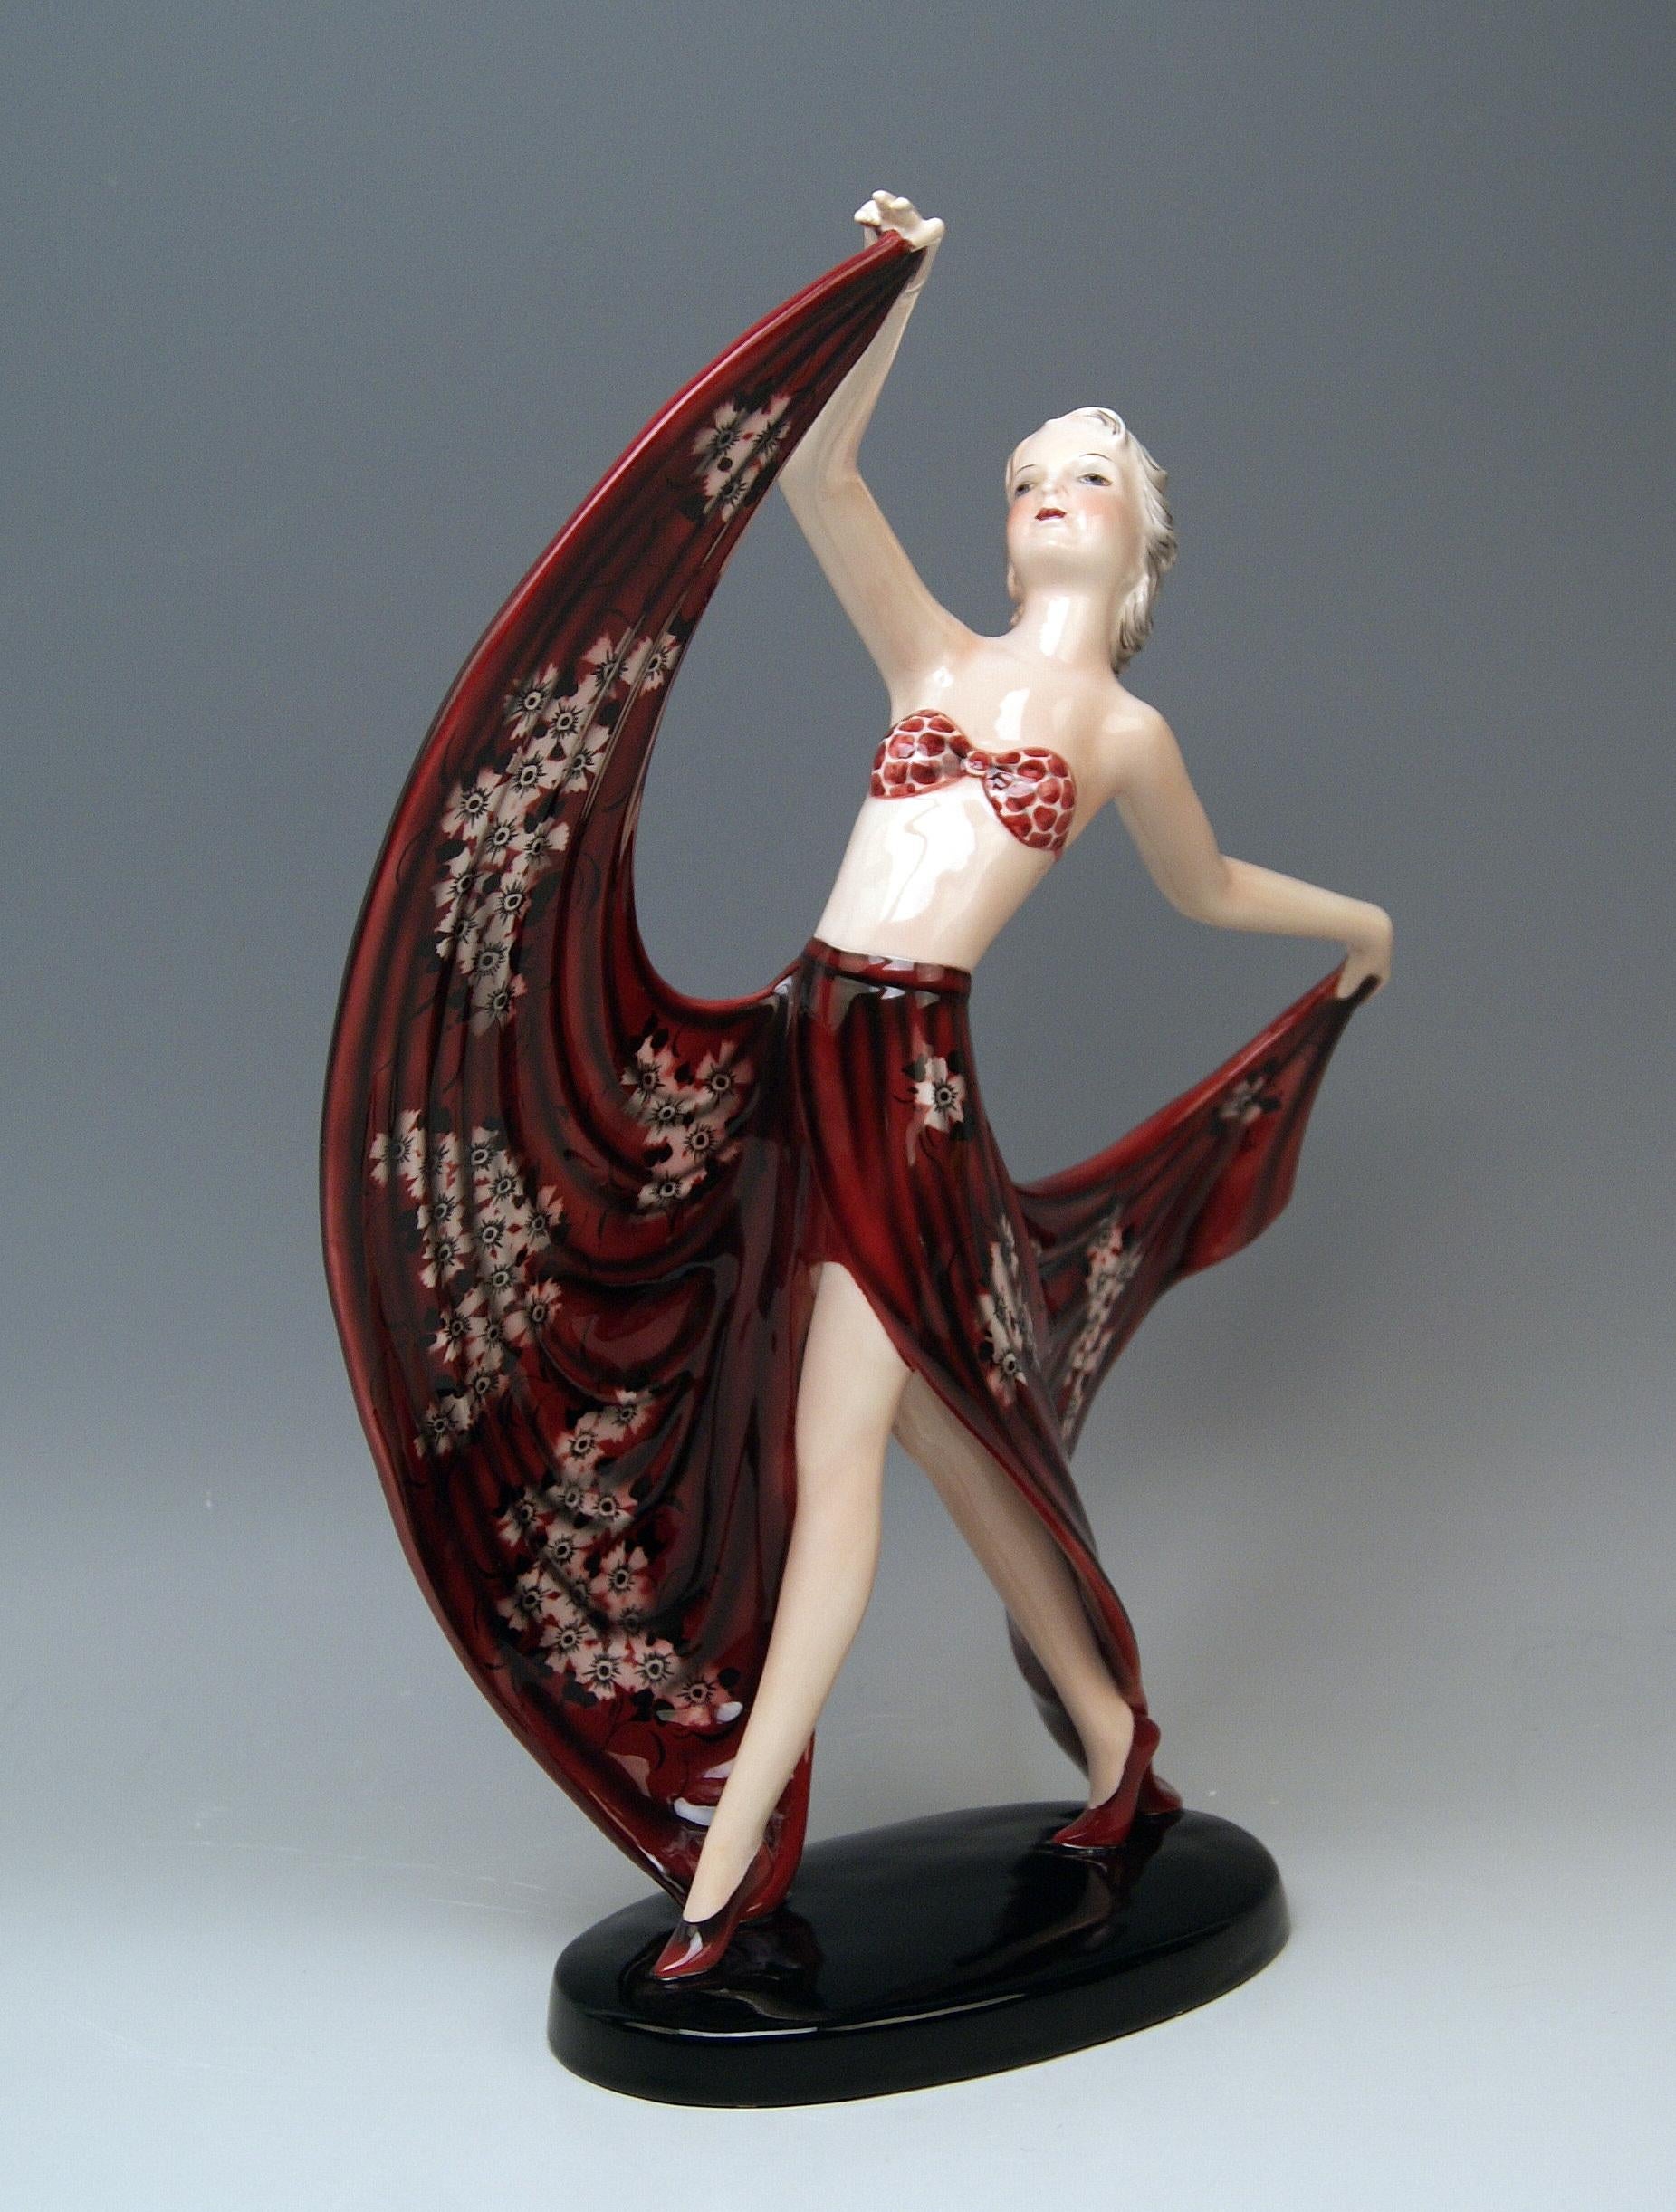 Goldscheider Vienna lady dancer called champagner.

Designed circa 1937 by Stephan Dakon (1904-1997).
made circa 1938. 
model number 7857 / 167 / 2
painter's sign & signature 'Dakon' at reverse side of base existing / additionally, the